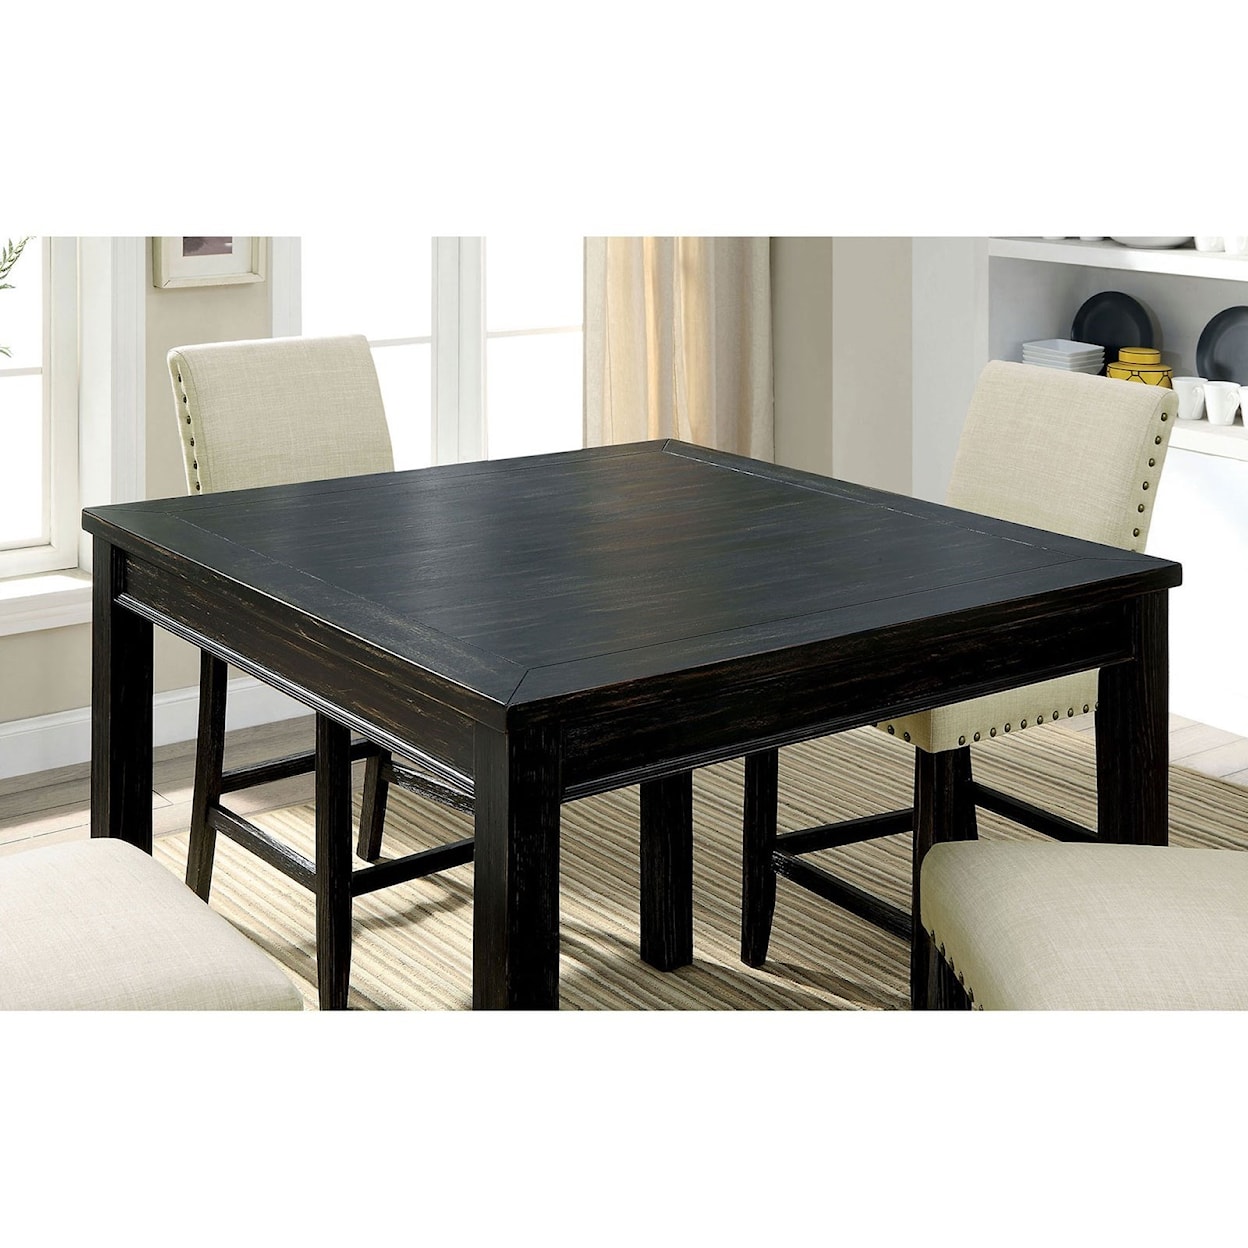 Furniture of America Kristie 5 Pc. Counter Ht. Table Set